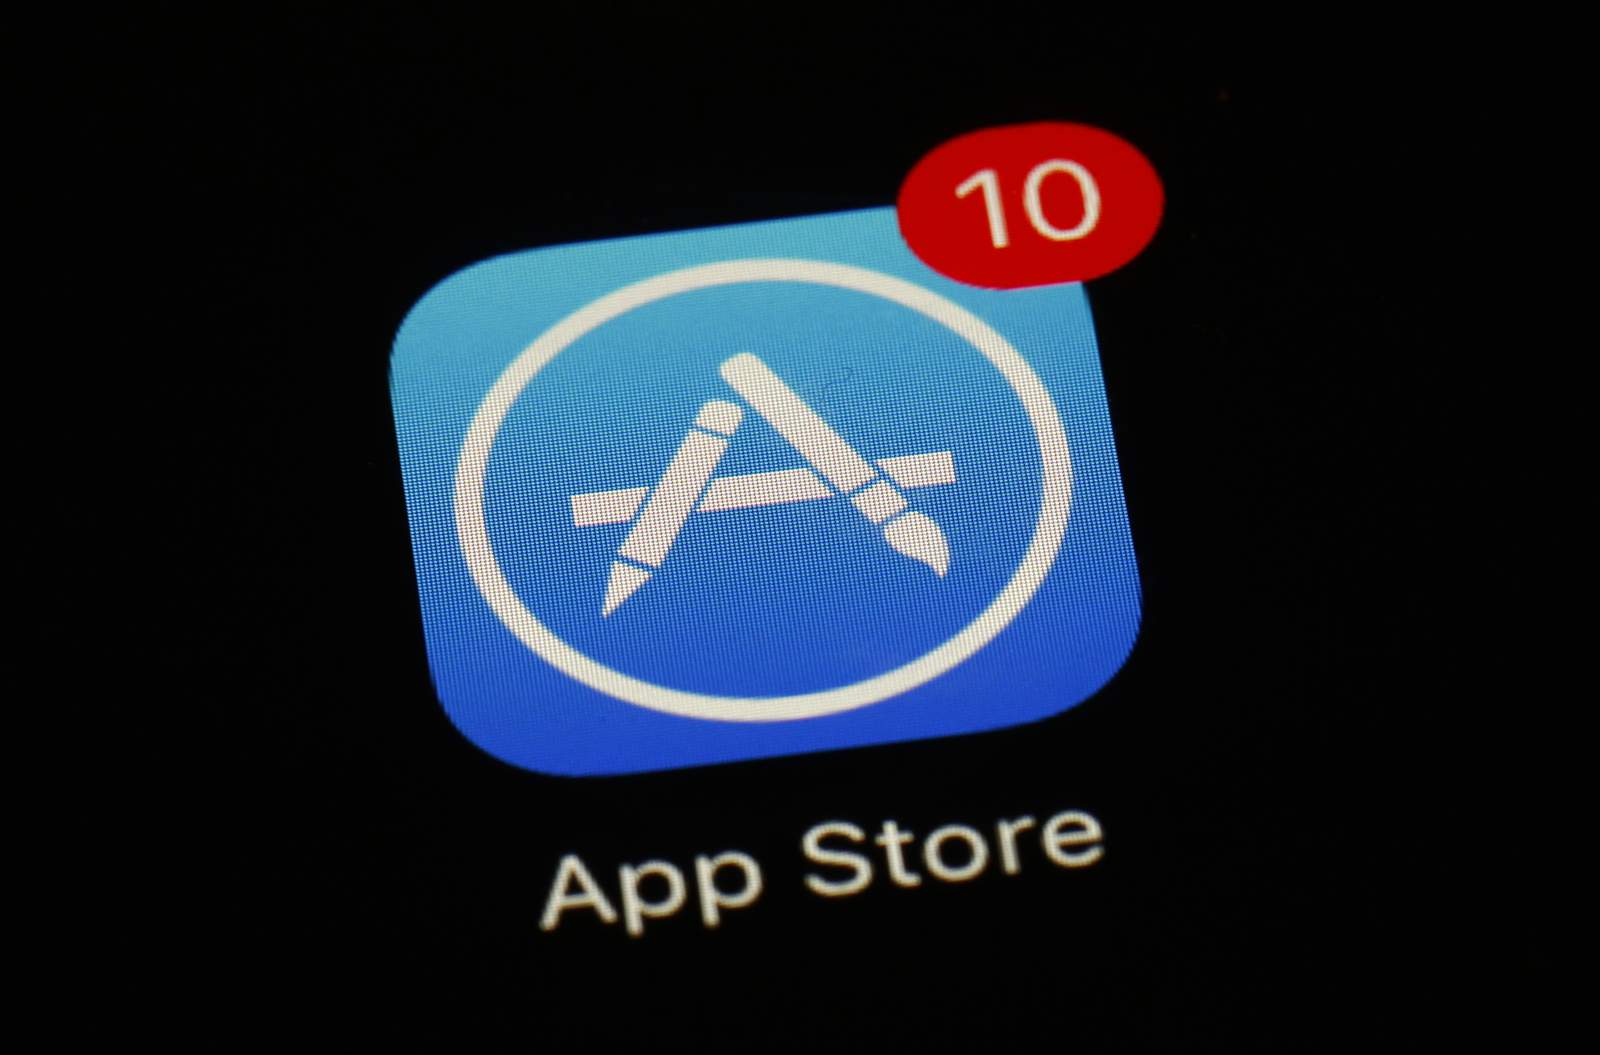 Apple's app stores open new privacy window for customers